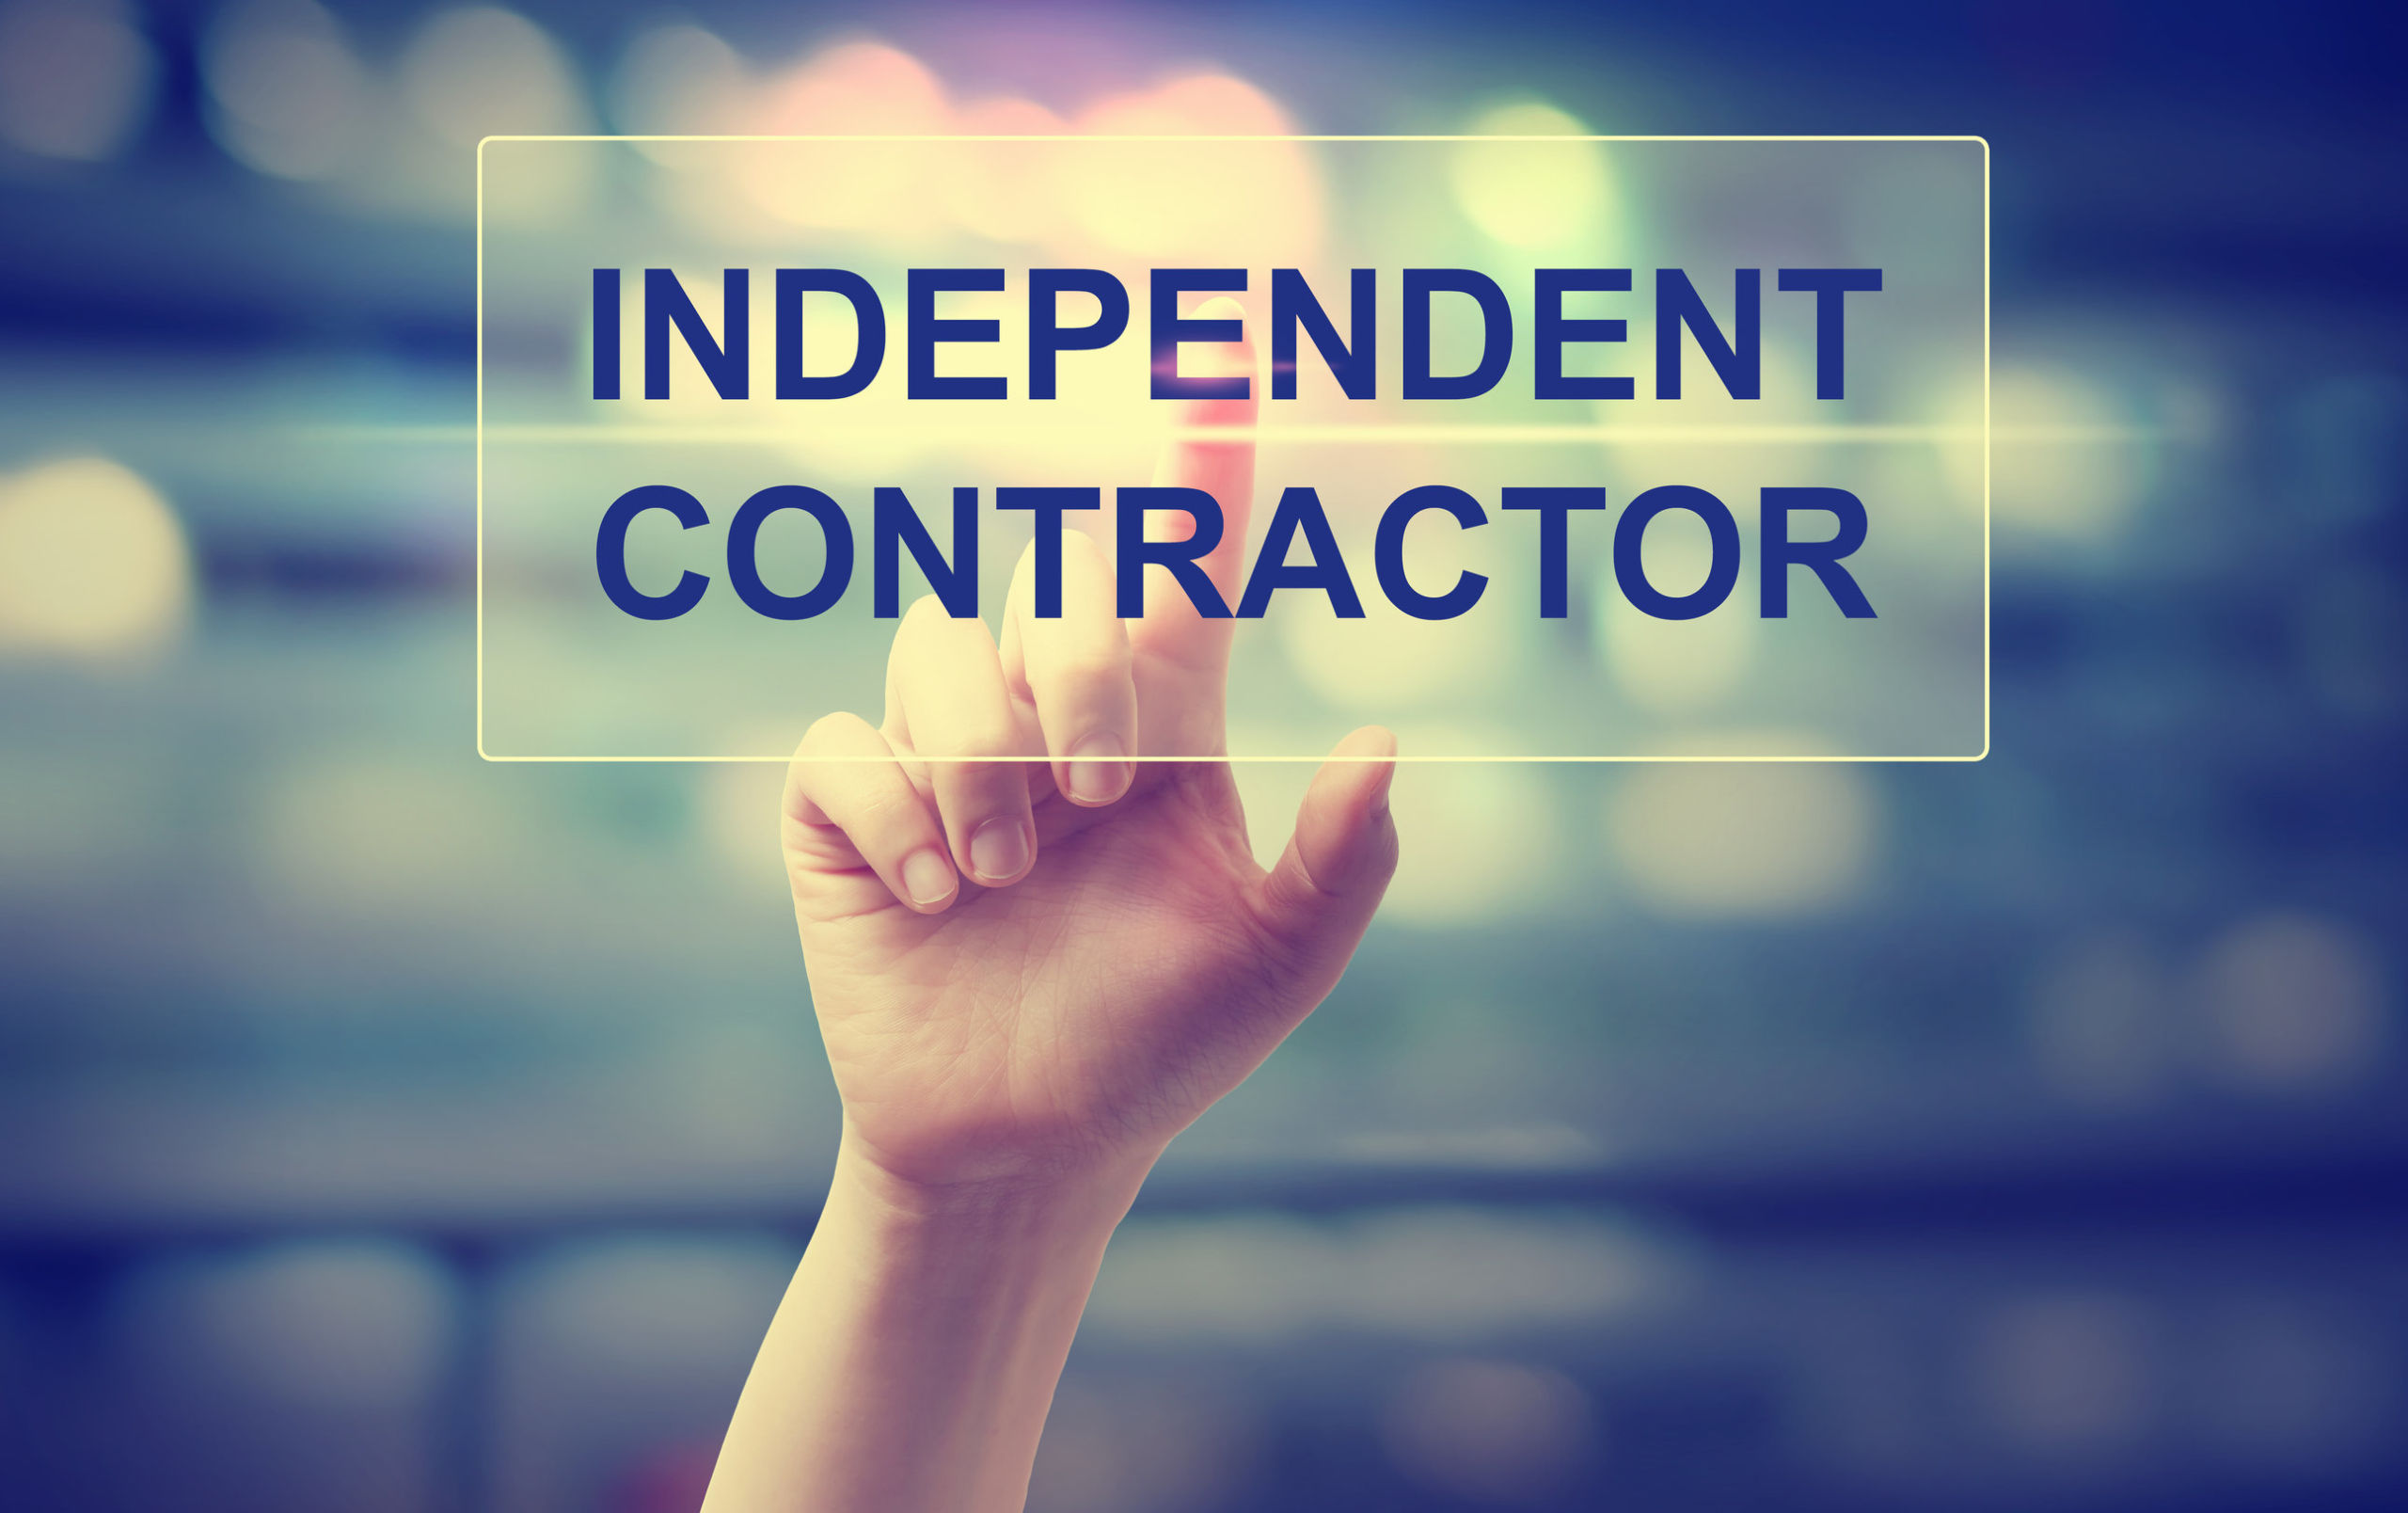 Independent Contractor Misclassification Litigation: Demystifying Tools and Tactics